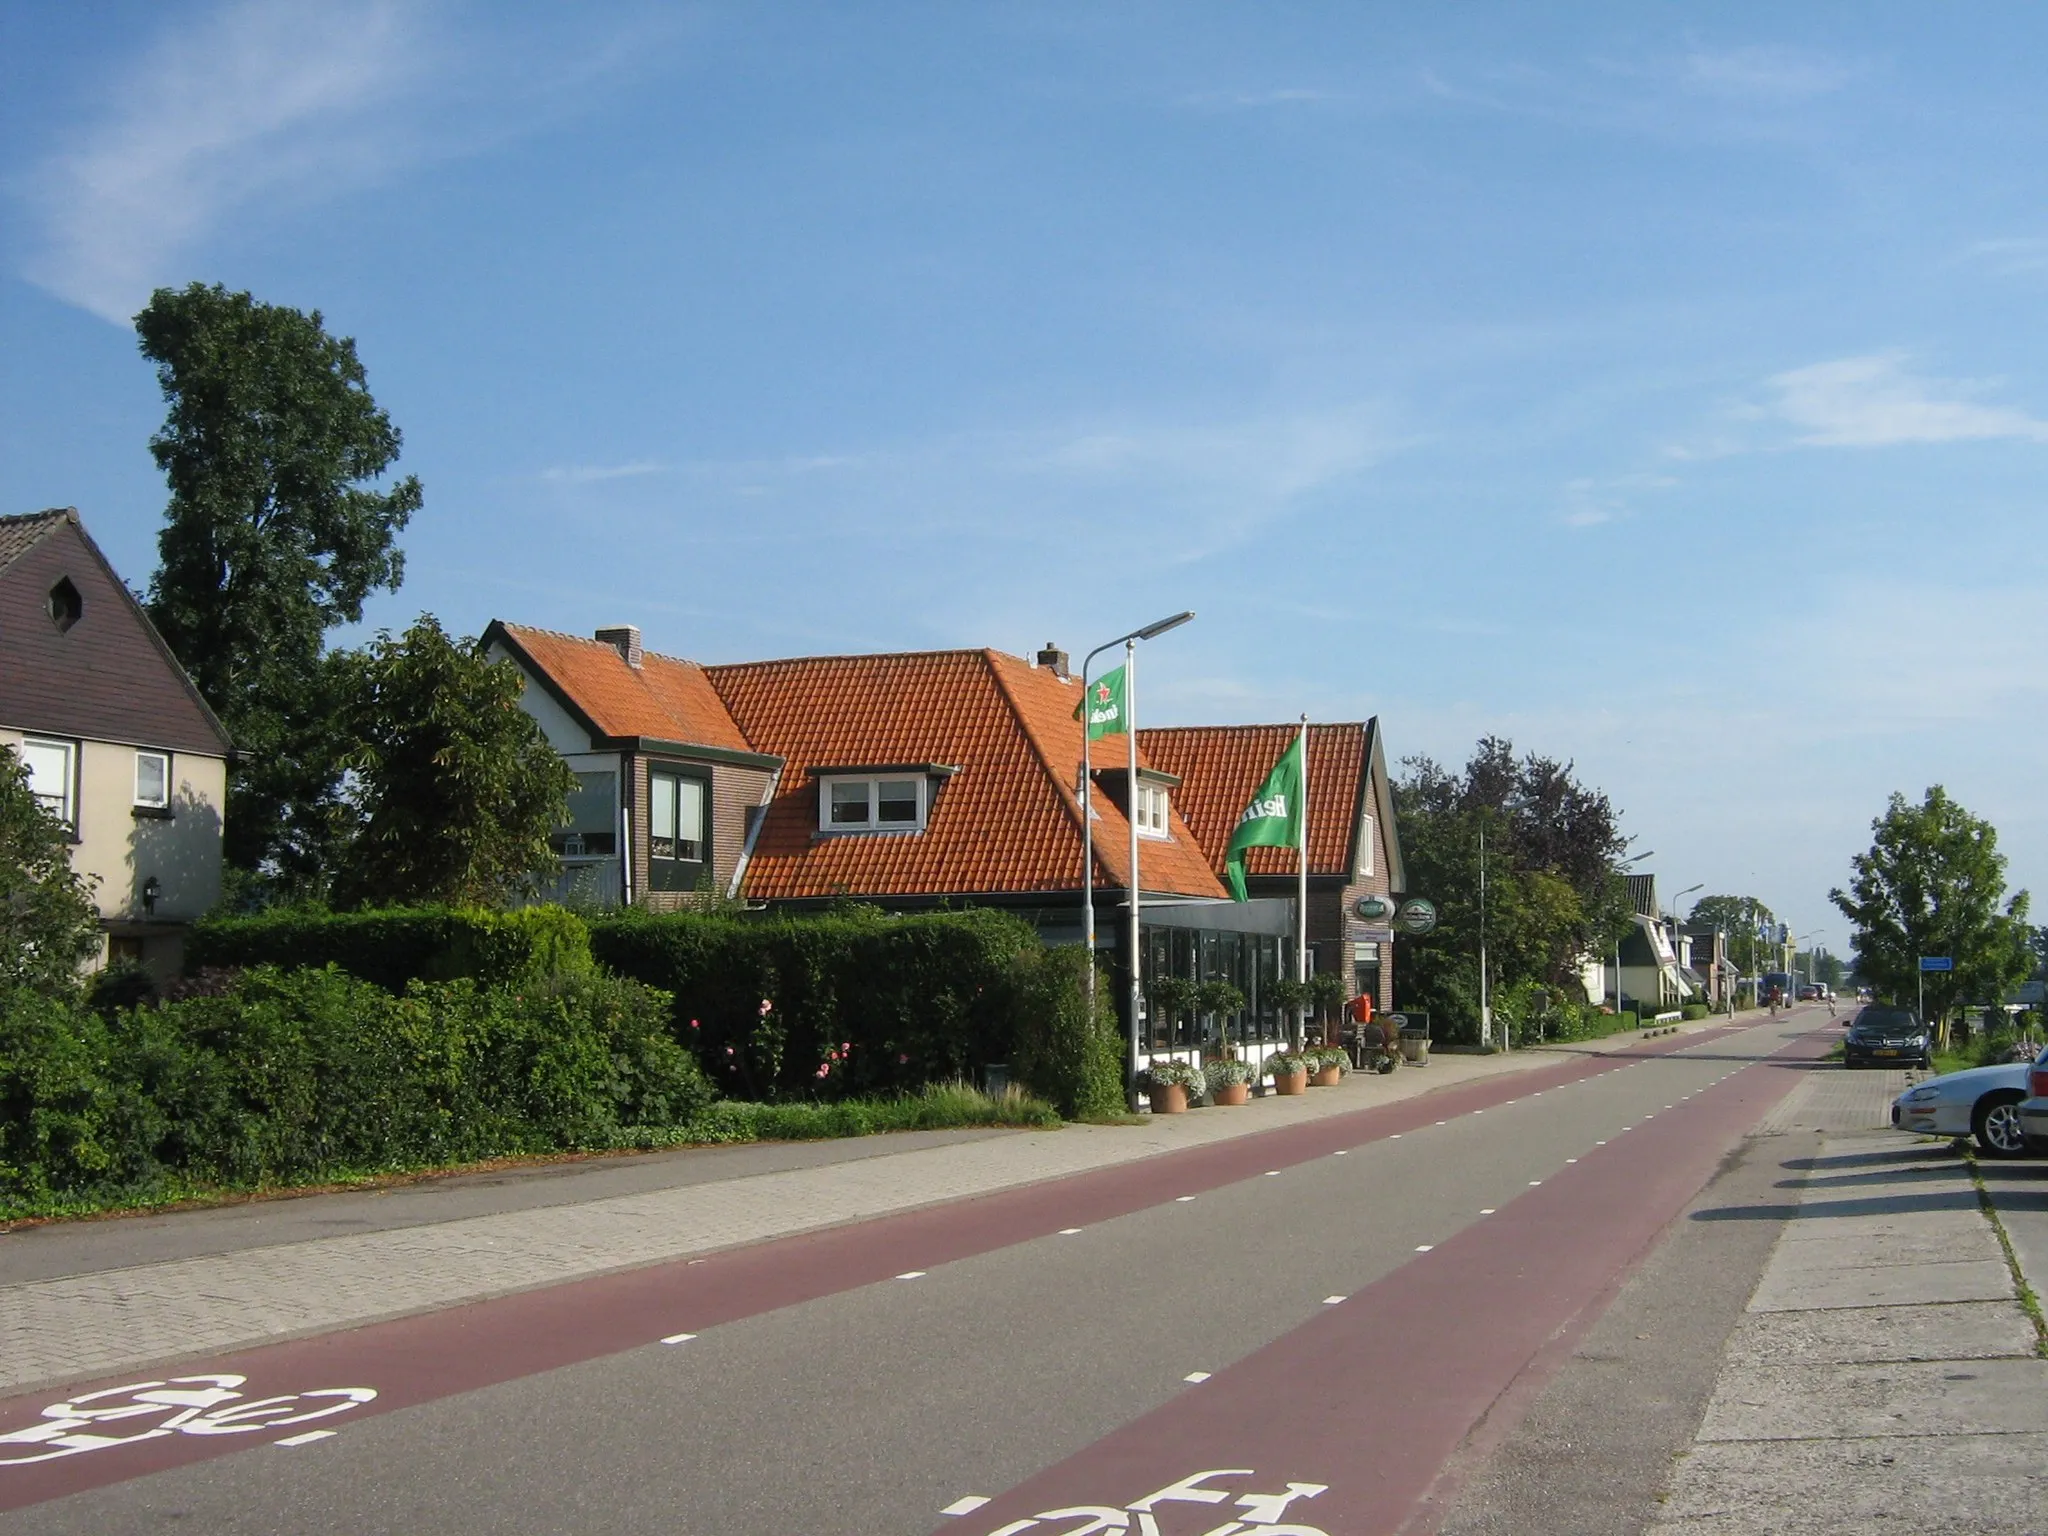 Photo showing: The Schipholdijk (name of road) in the village of Oude Meer, Haarlemmermeer municipality, the Netherlands. Shown in the center is Cafe-Restaurant Wink at number 270.